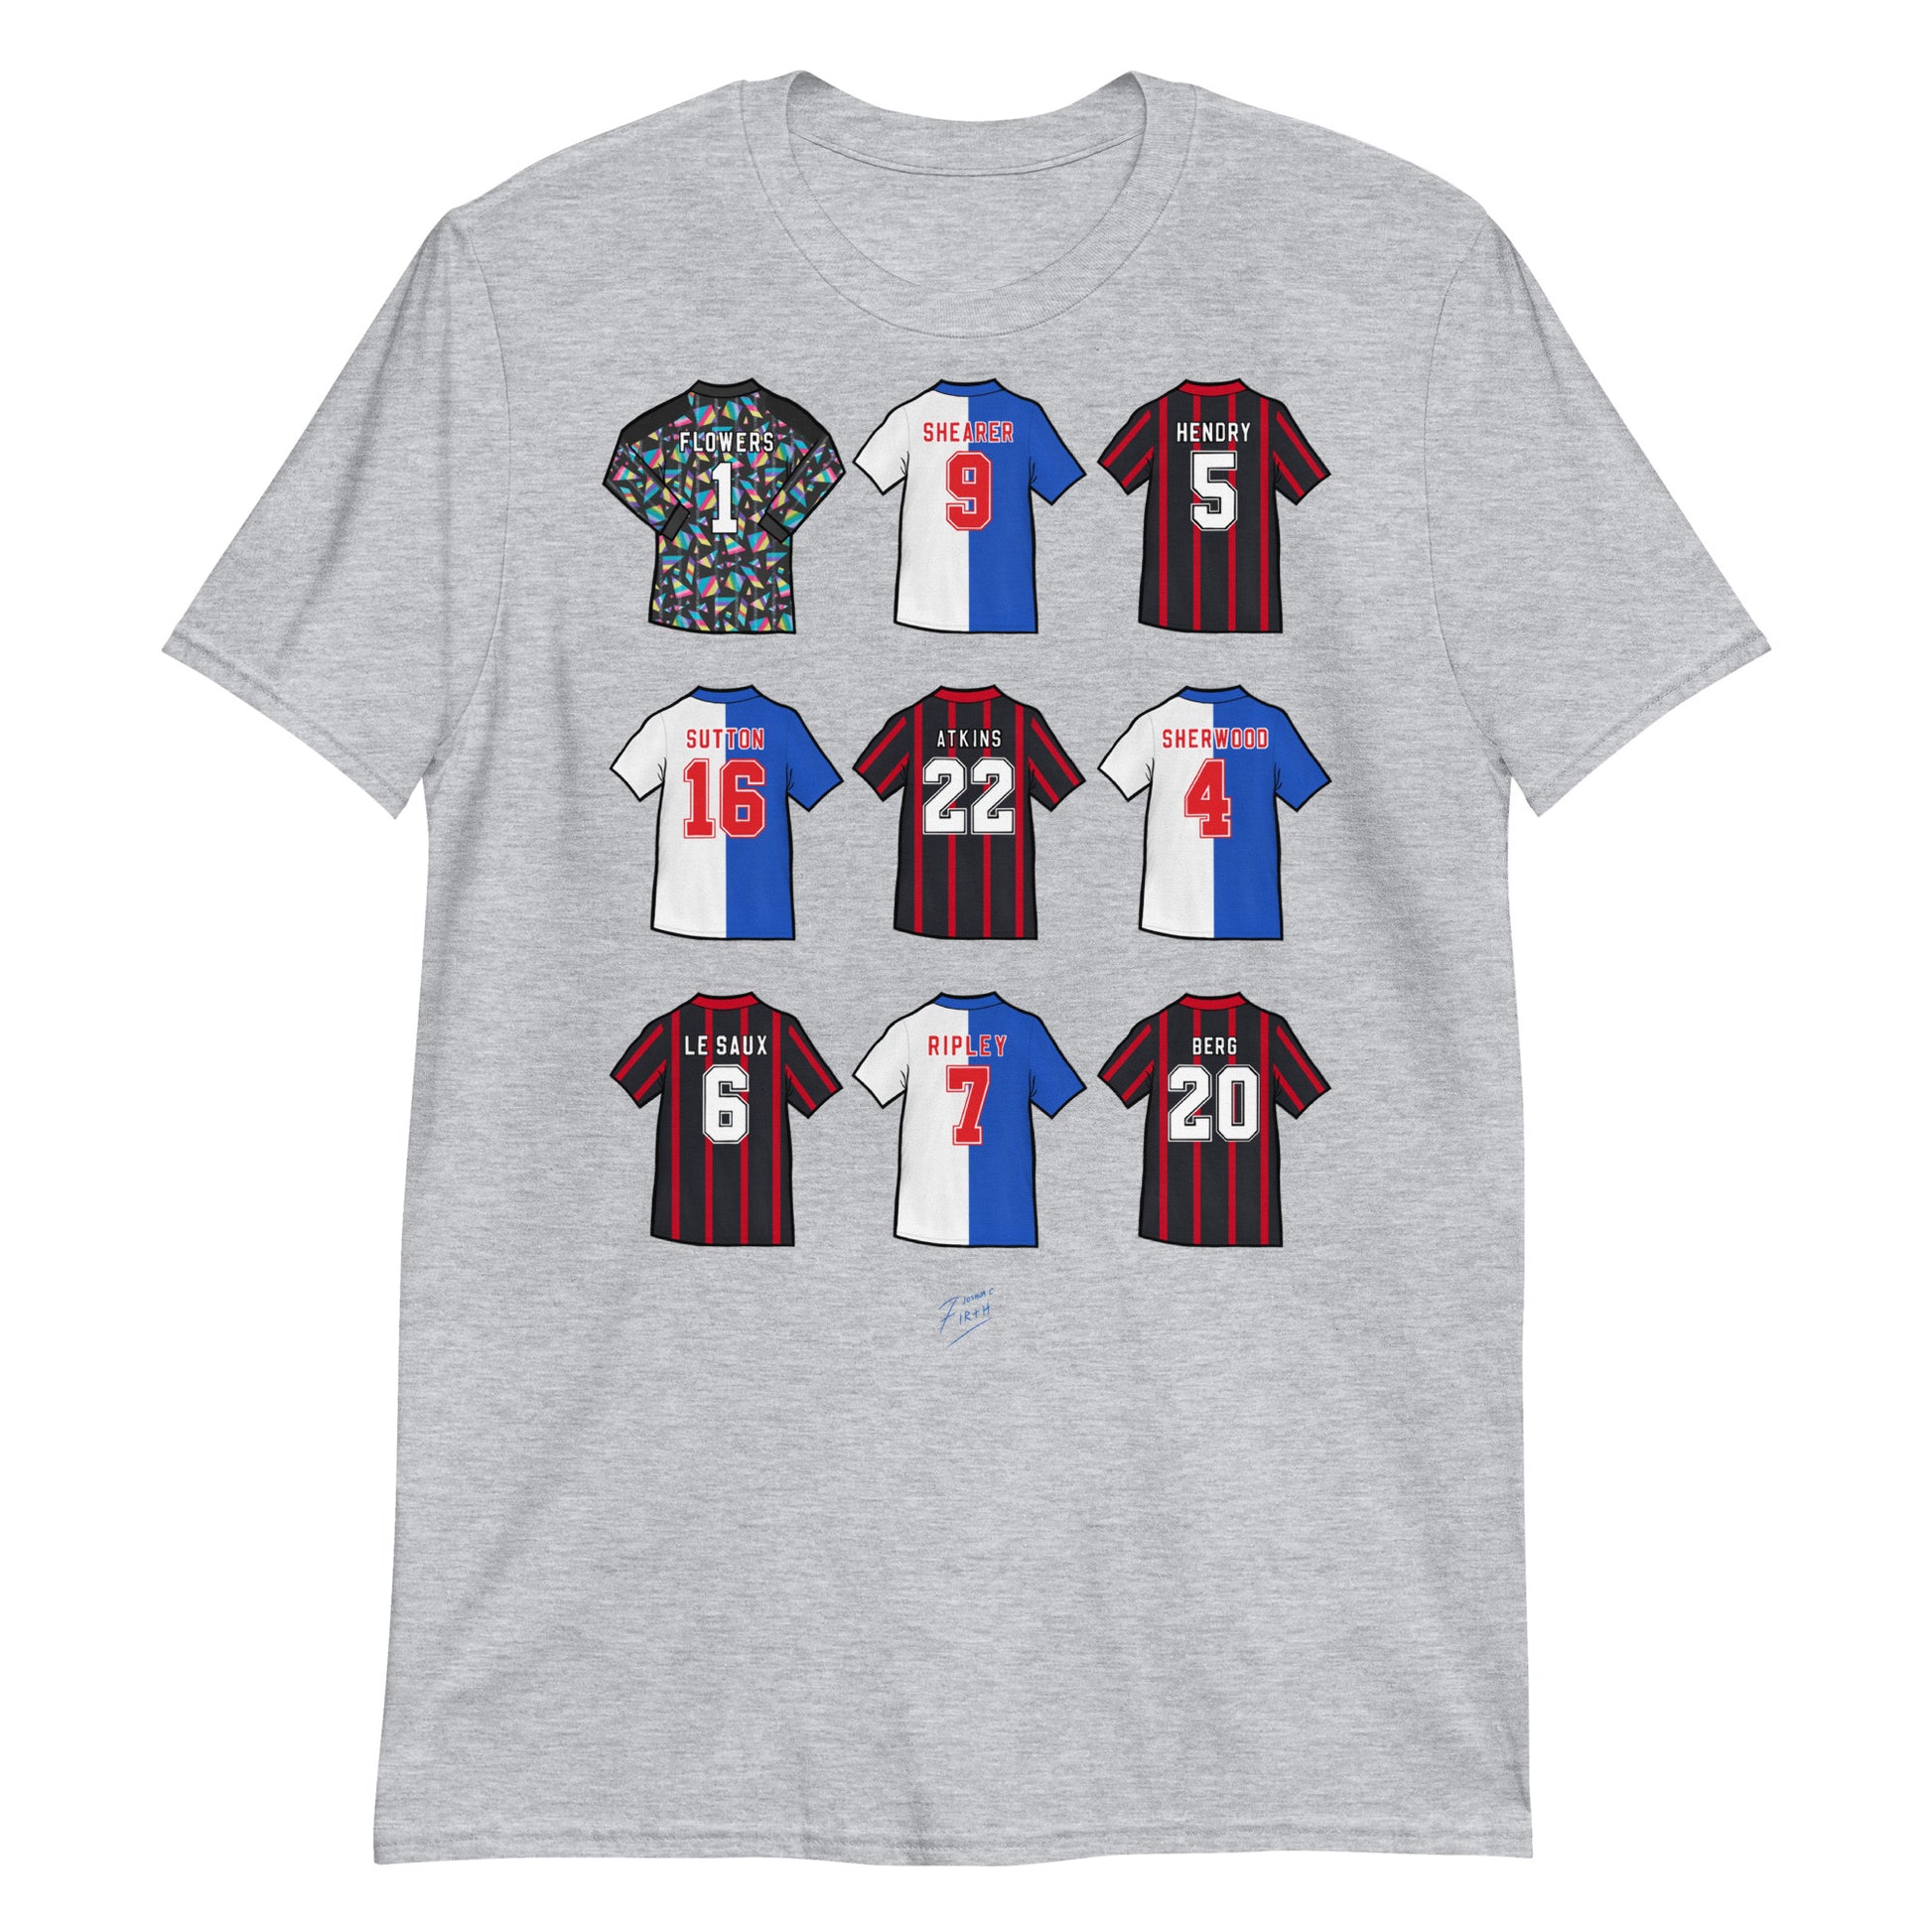 Grey T-shirt inspired by the legendary Blackburn Rovers players of the past! A great tribute to that team of 1994/95